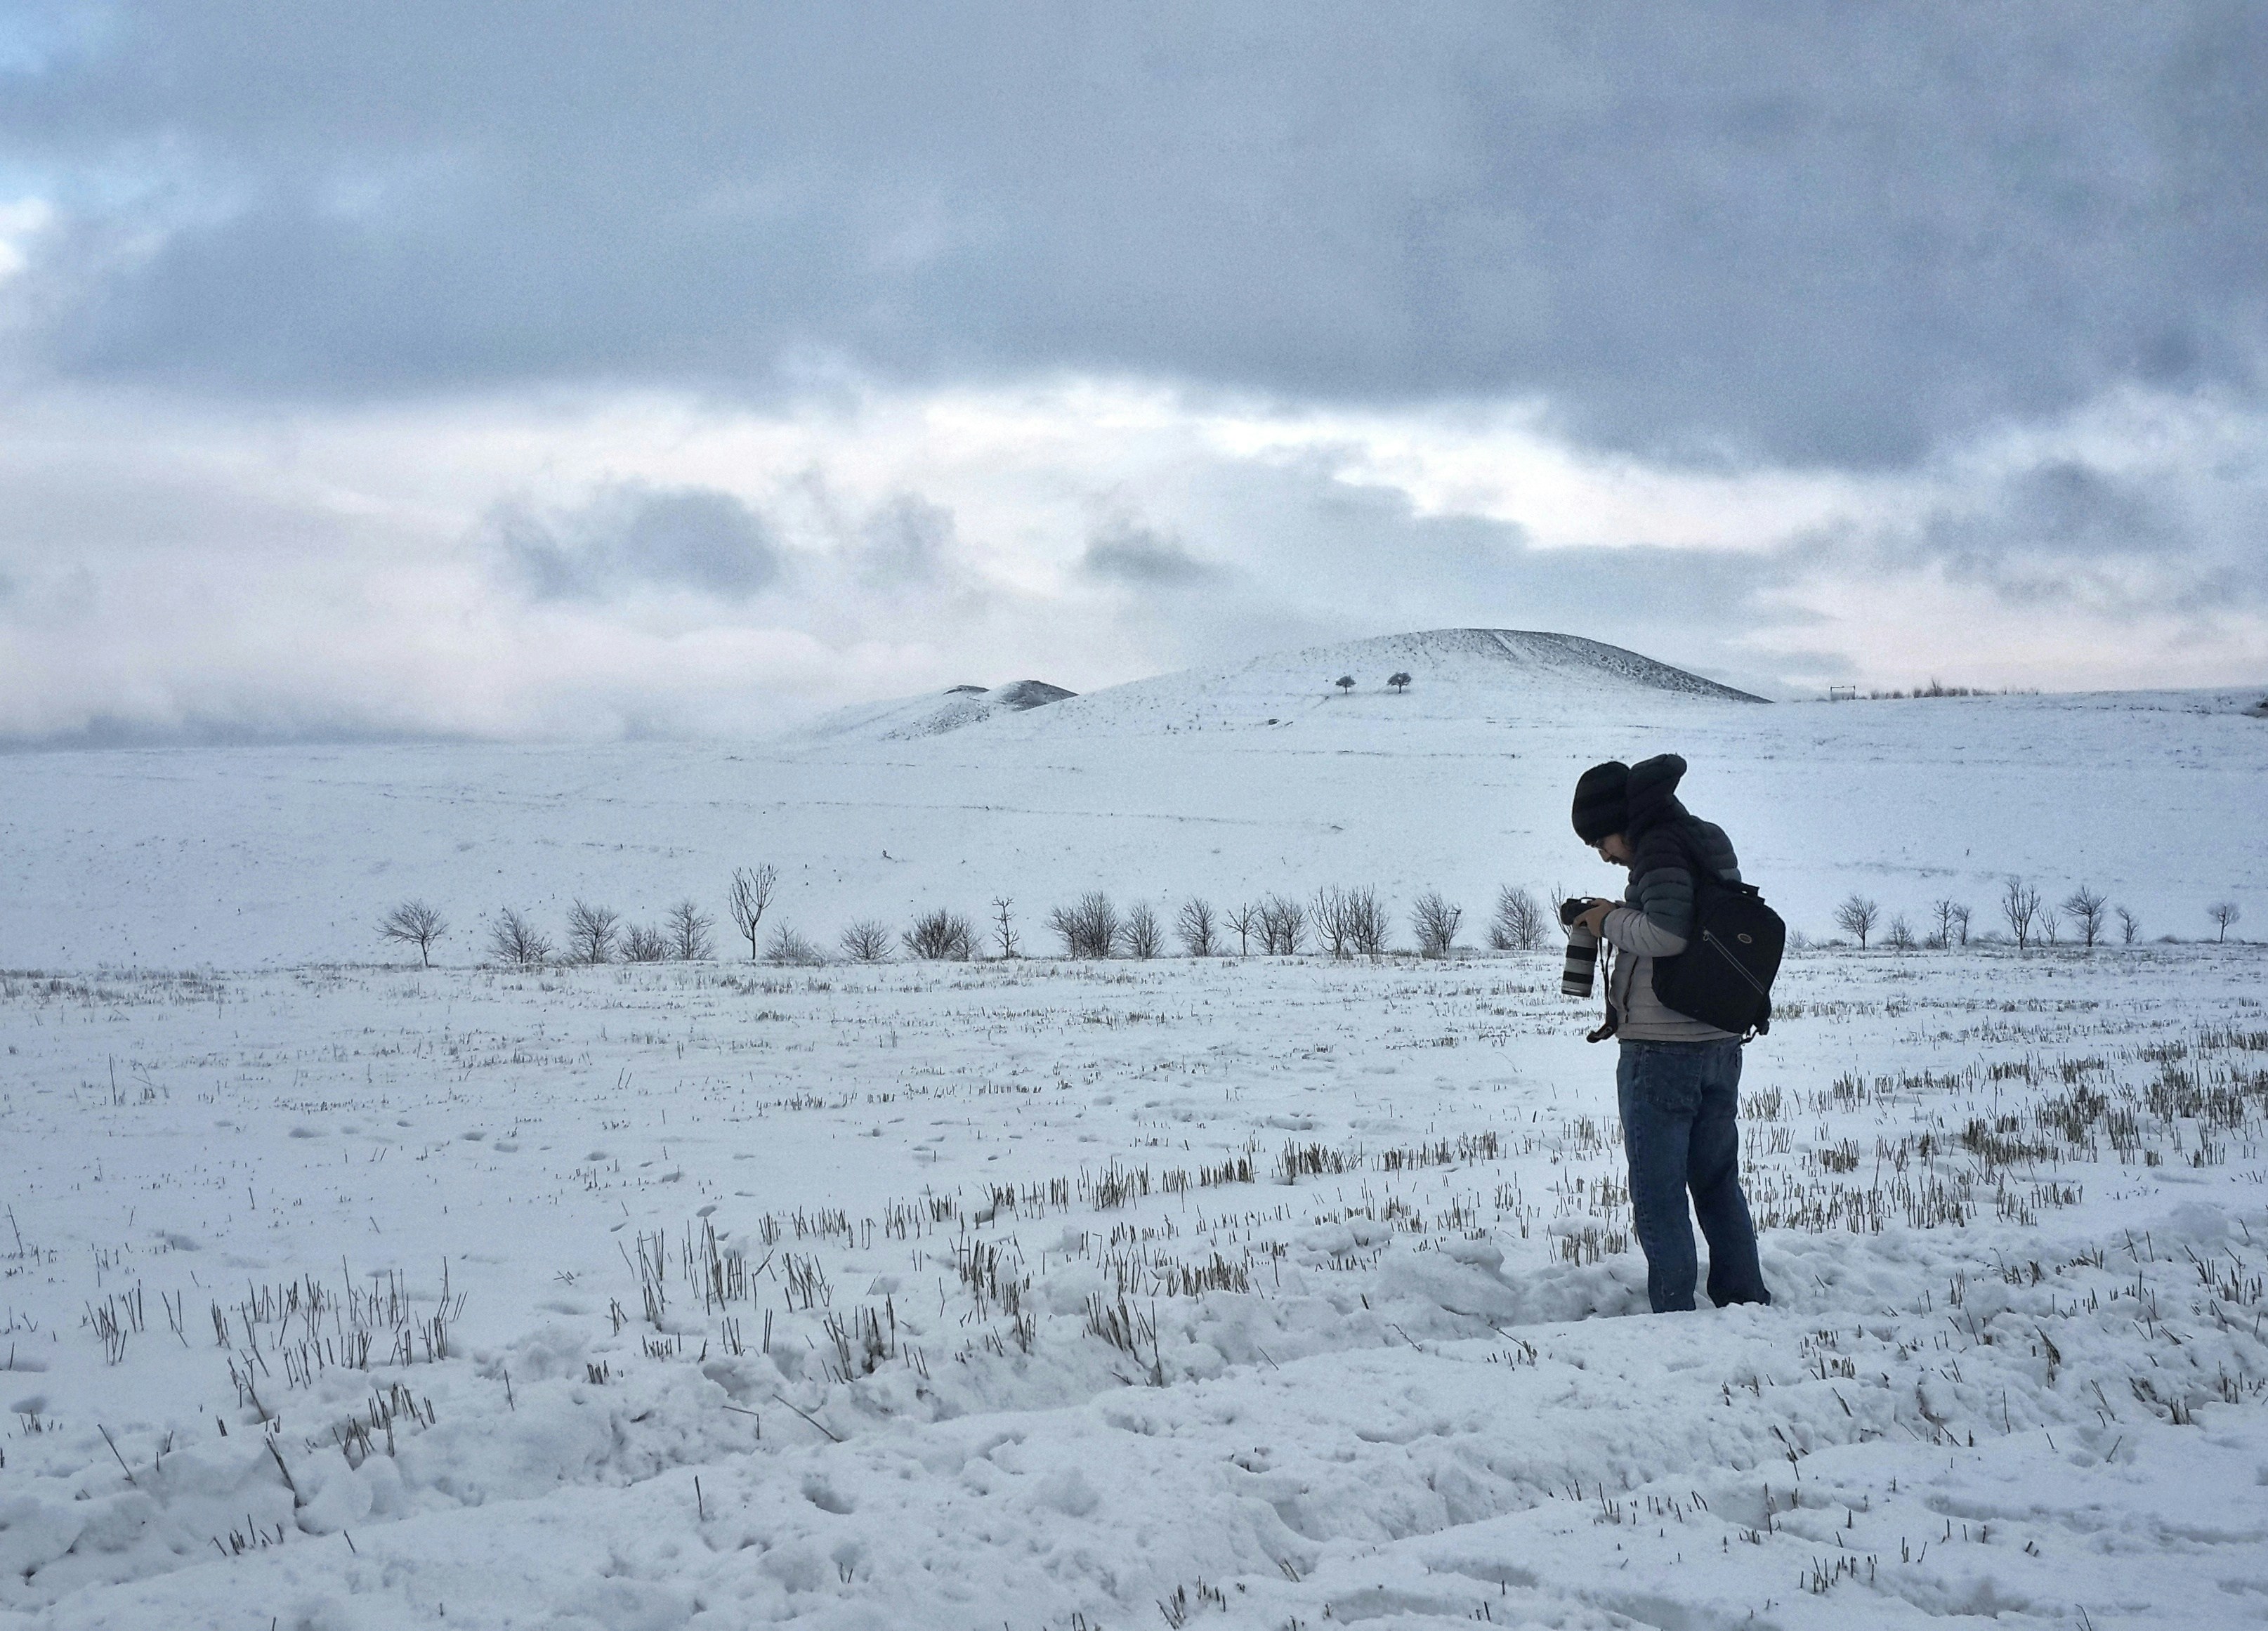 An Iranian photographer is taking capture a snowy landscape in Alamut